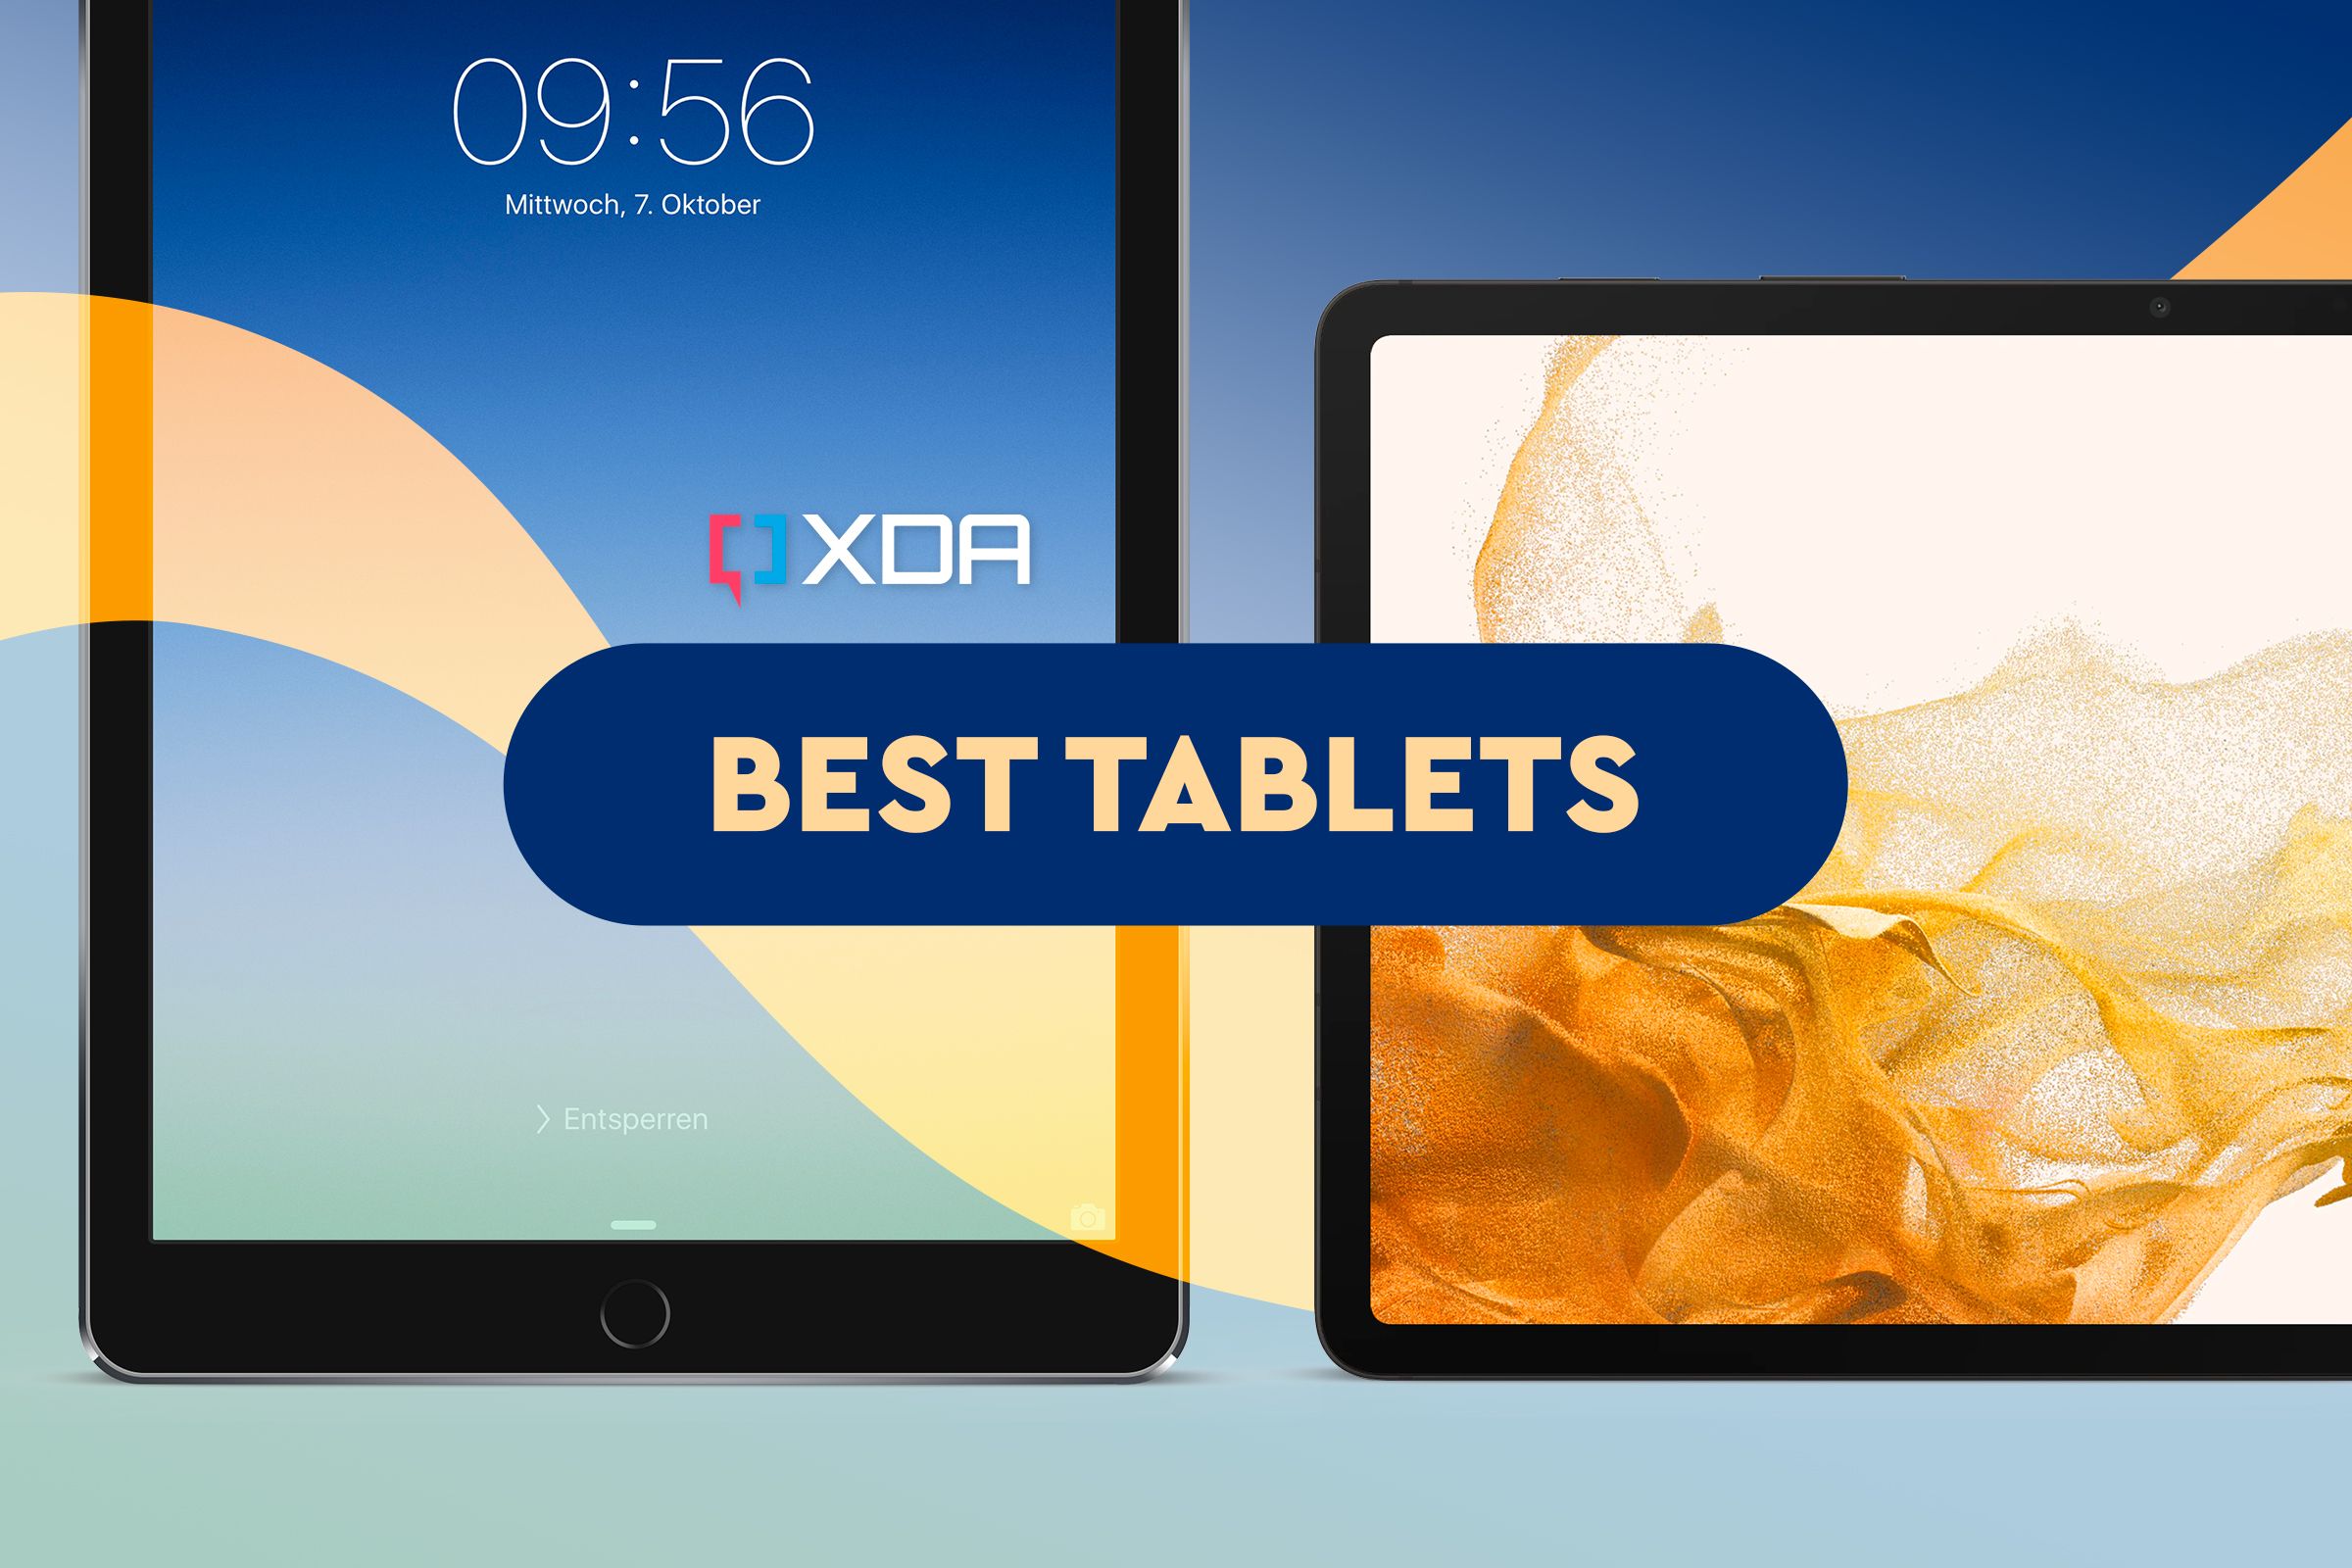 An image showing an Apple iPad and the Galaxy Tab S8  with an XDA logo and 